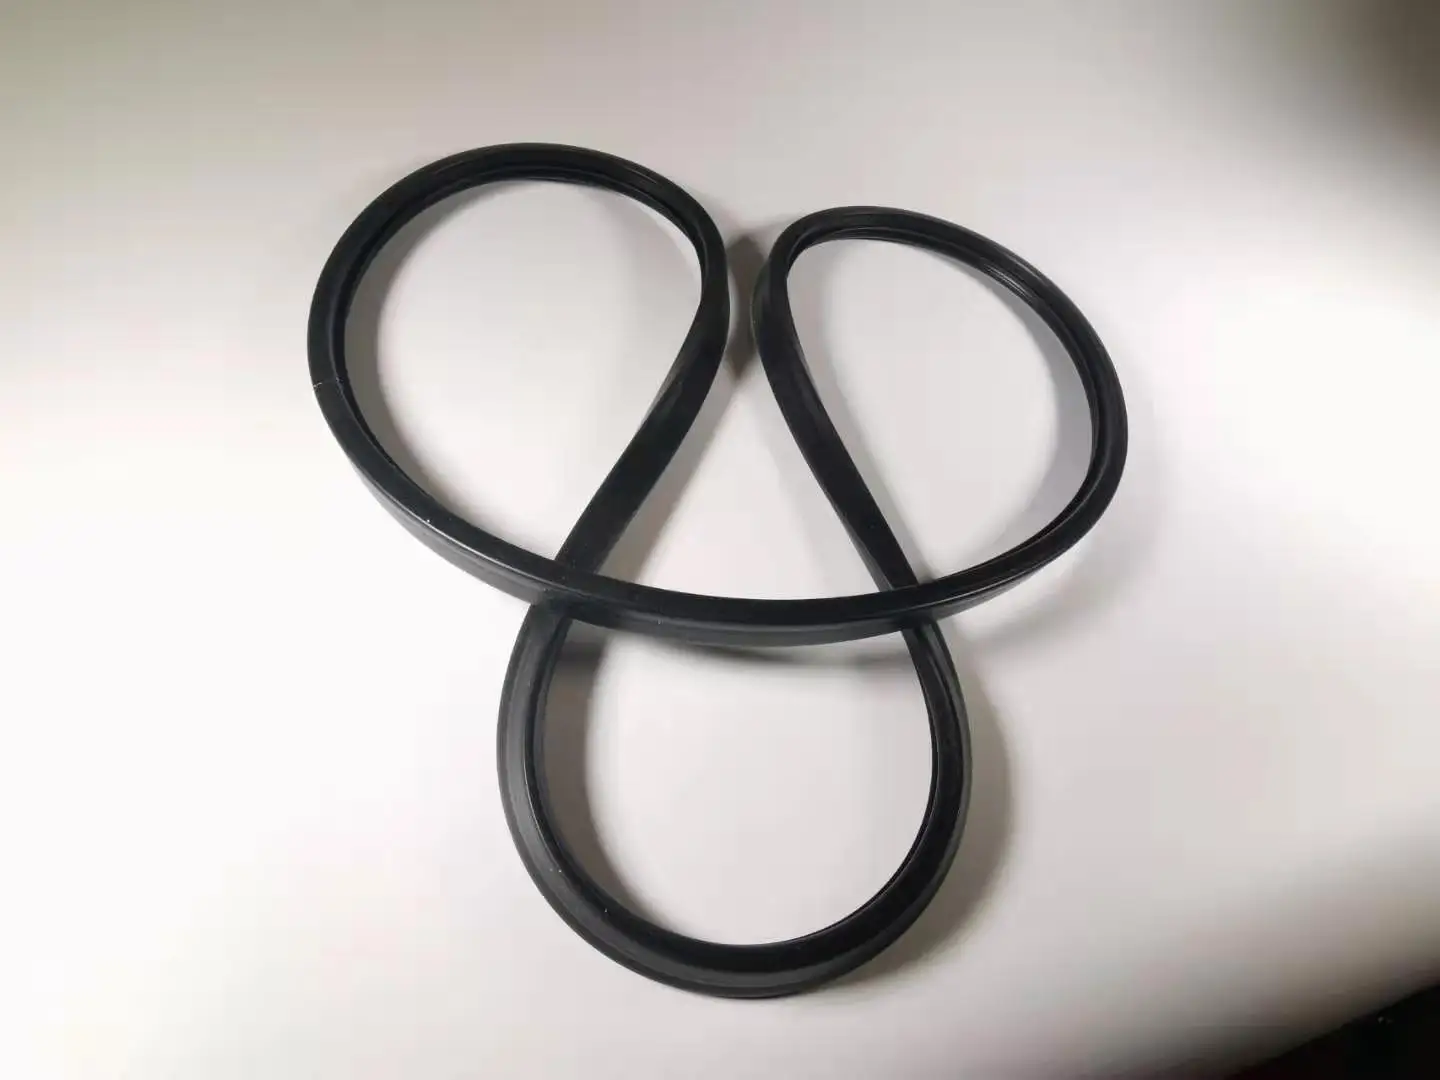 Factory supply customized silicone door gasket